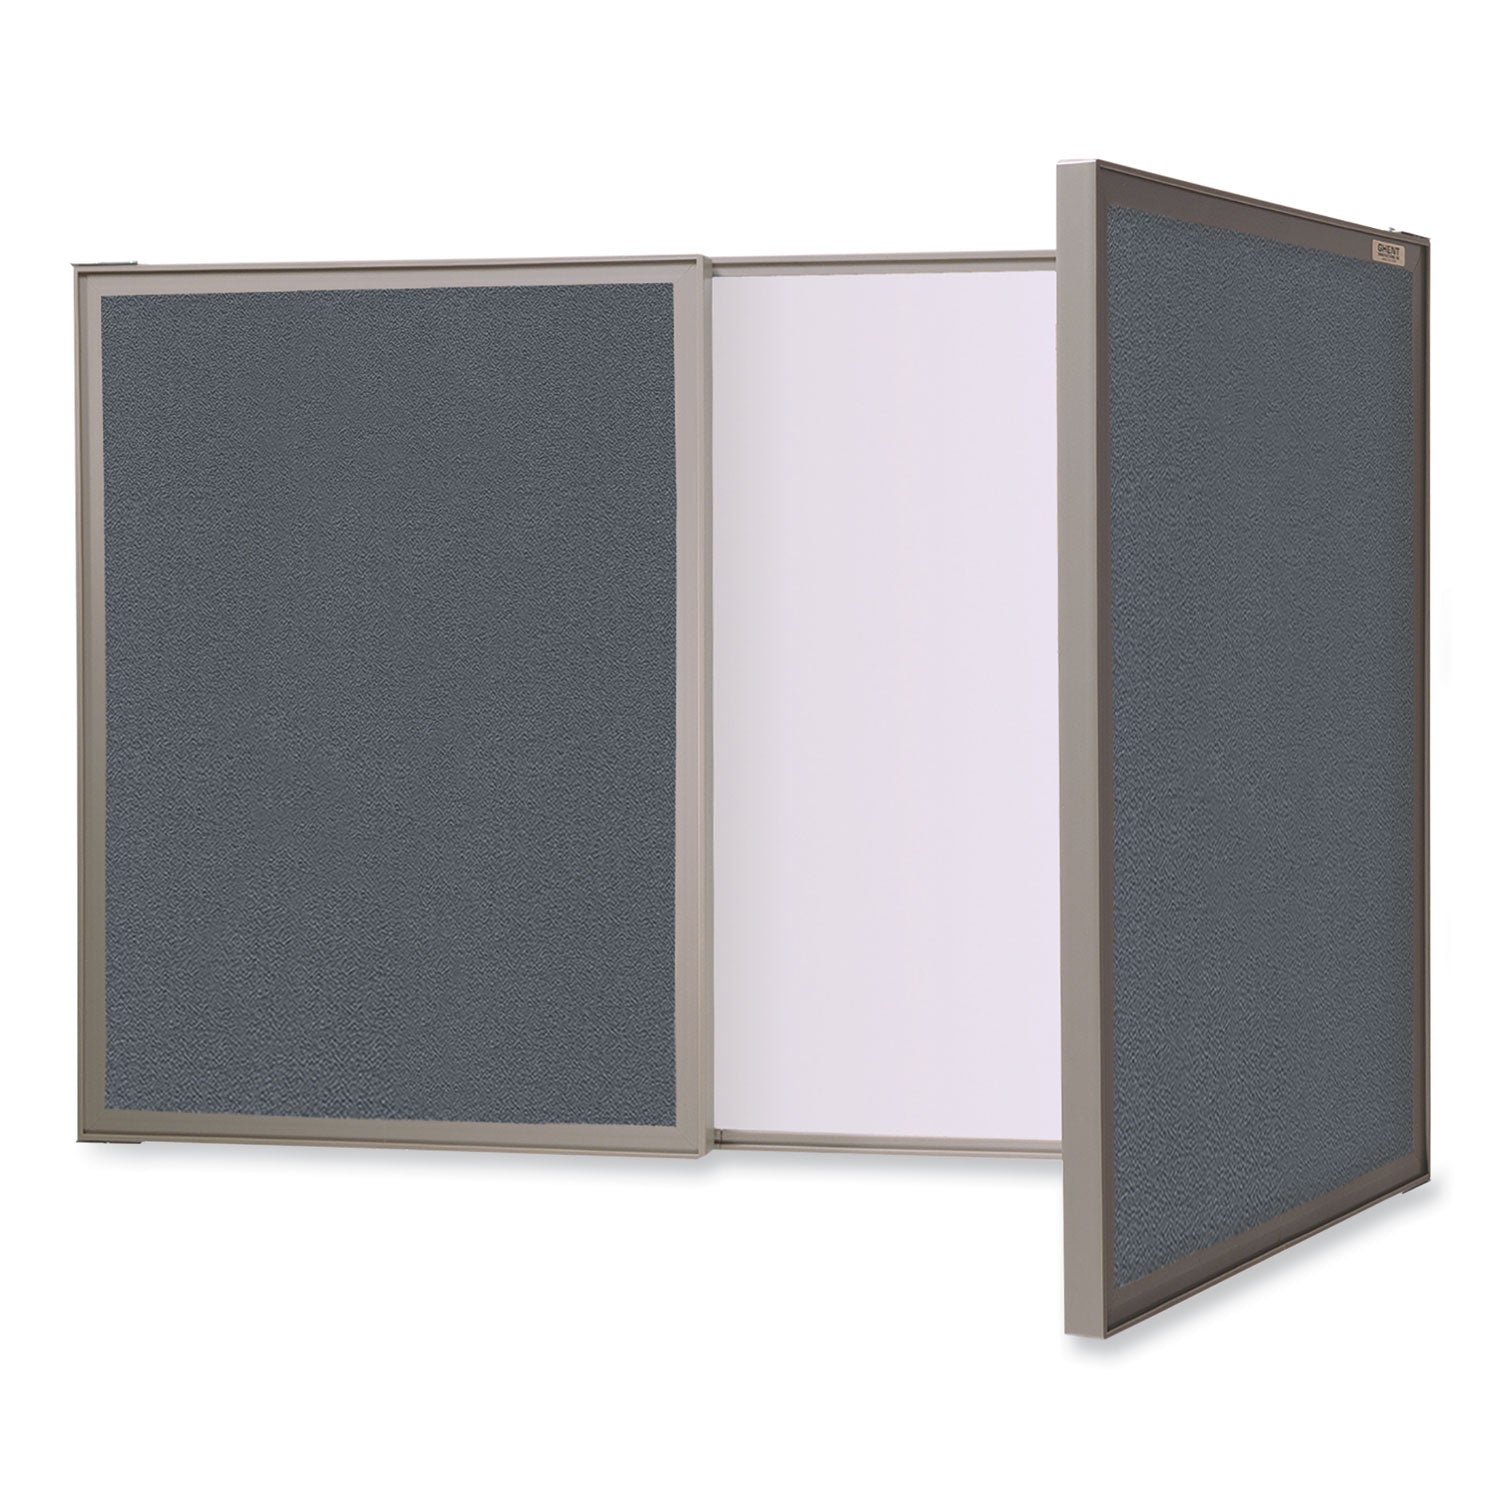 visuall-pc-whiteboard-cabinet-gray-fabric-bulletin-board-exterior-doors-36x24-aluminum-frame-ships-in-7-10-business-days_ghe41302 - 1